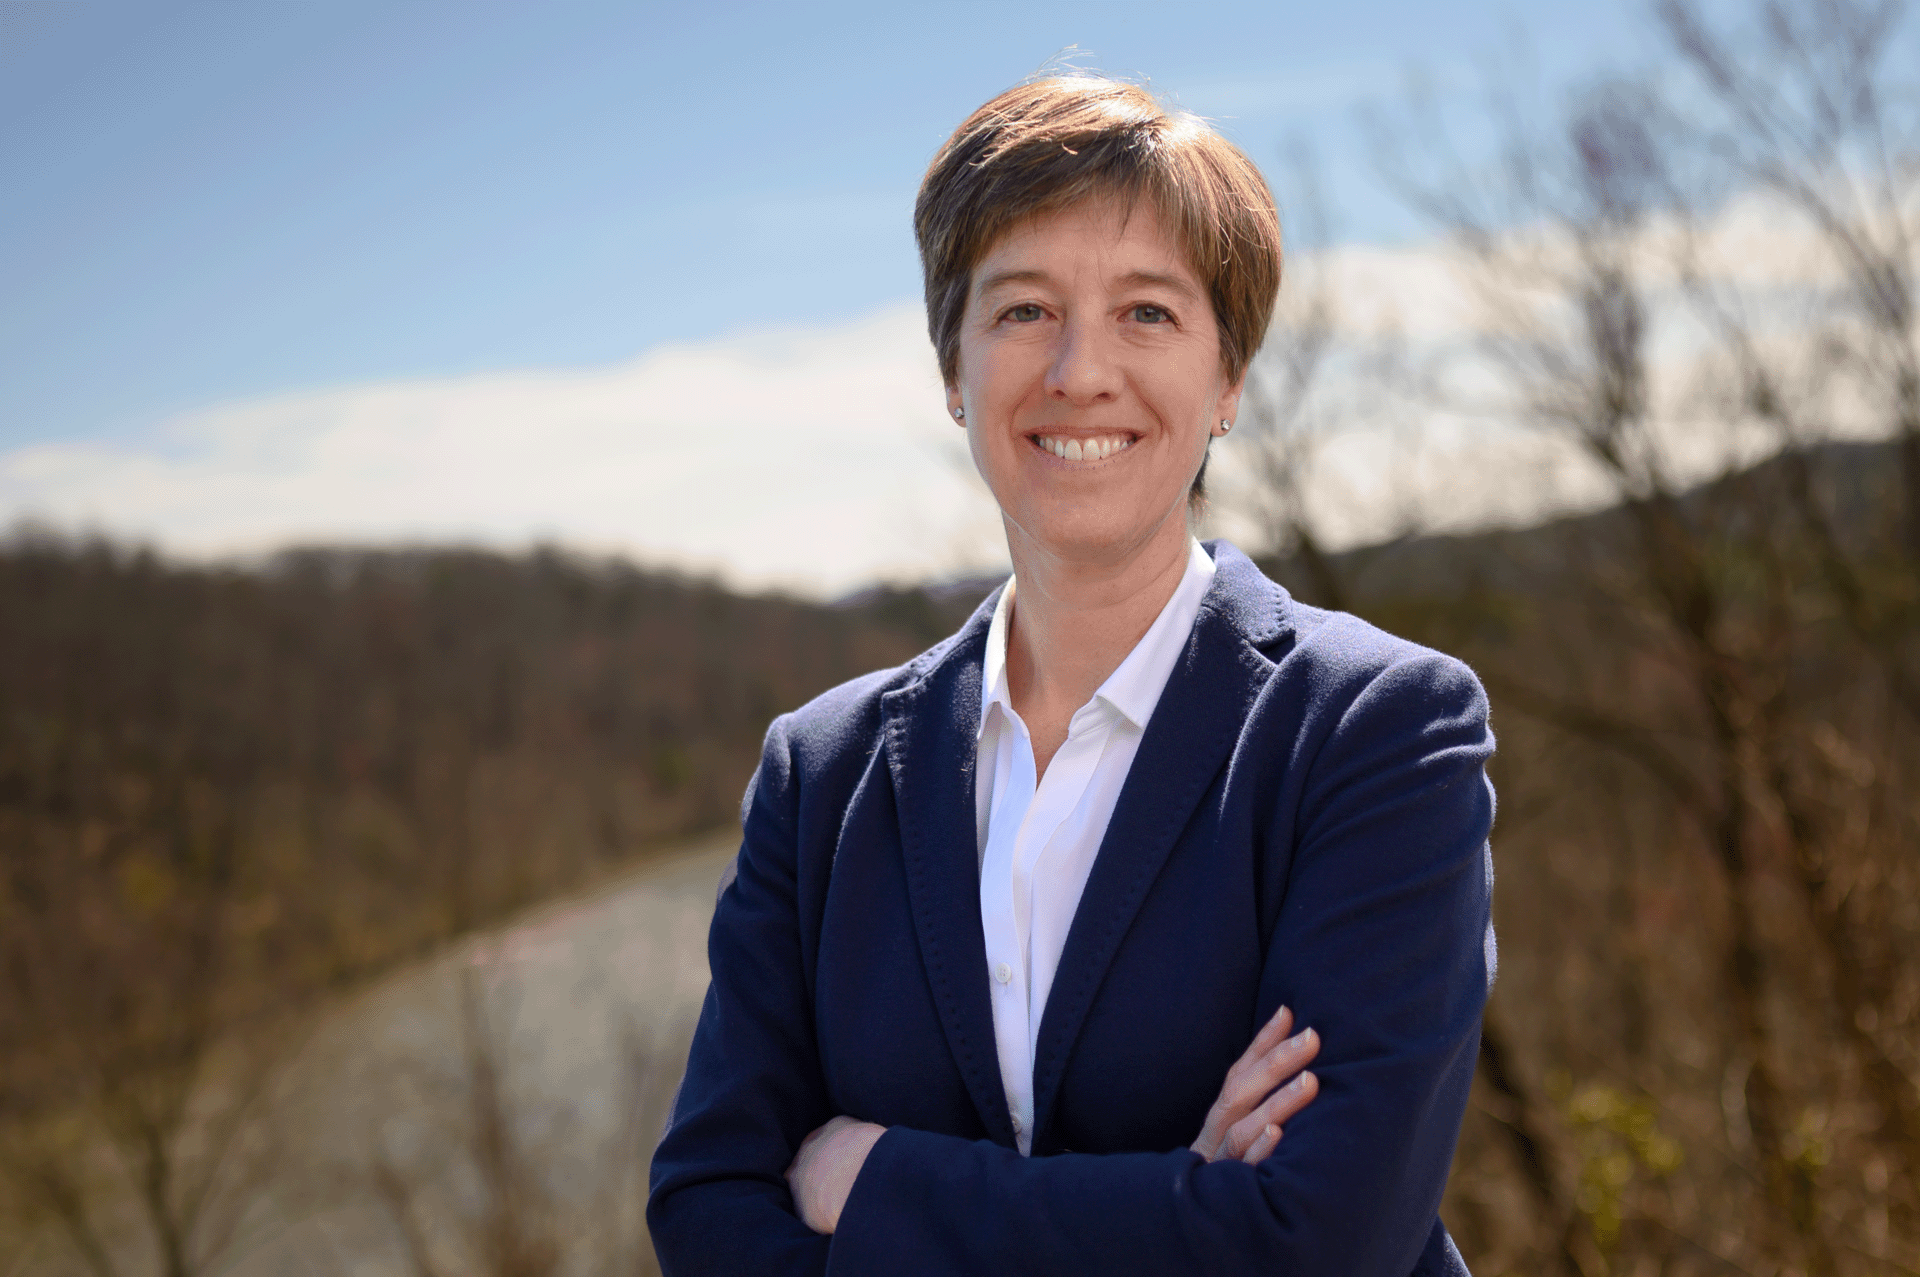 Julie Mayfield: I’ll be taking on a new role as MountainTrue’s Senior Policy Advisor